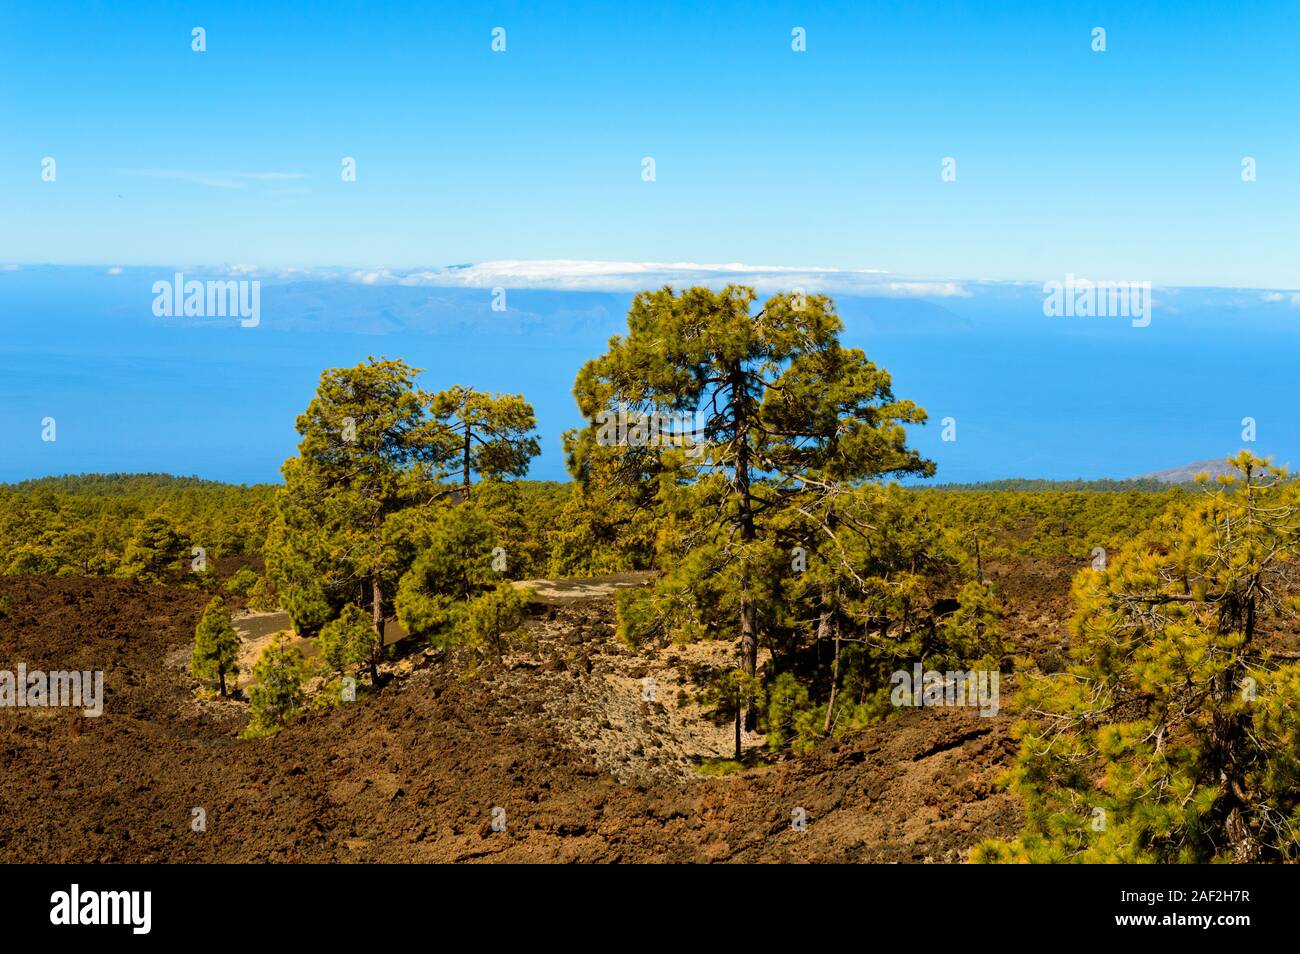 Firs Surrounded By Volcanic Rocks With Background The Atlantic Ocean In El Teide National Park. April 13, 2019. Santa Cruz De Tenerife Spain Africa. T Stock Photo